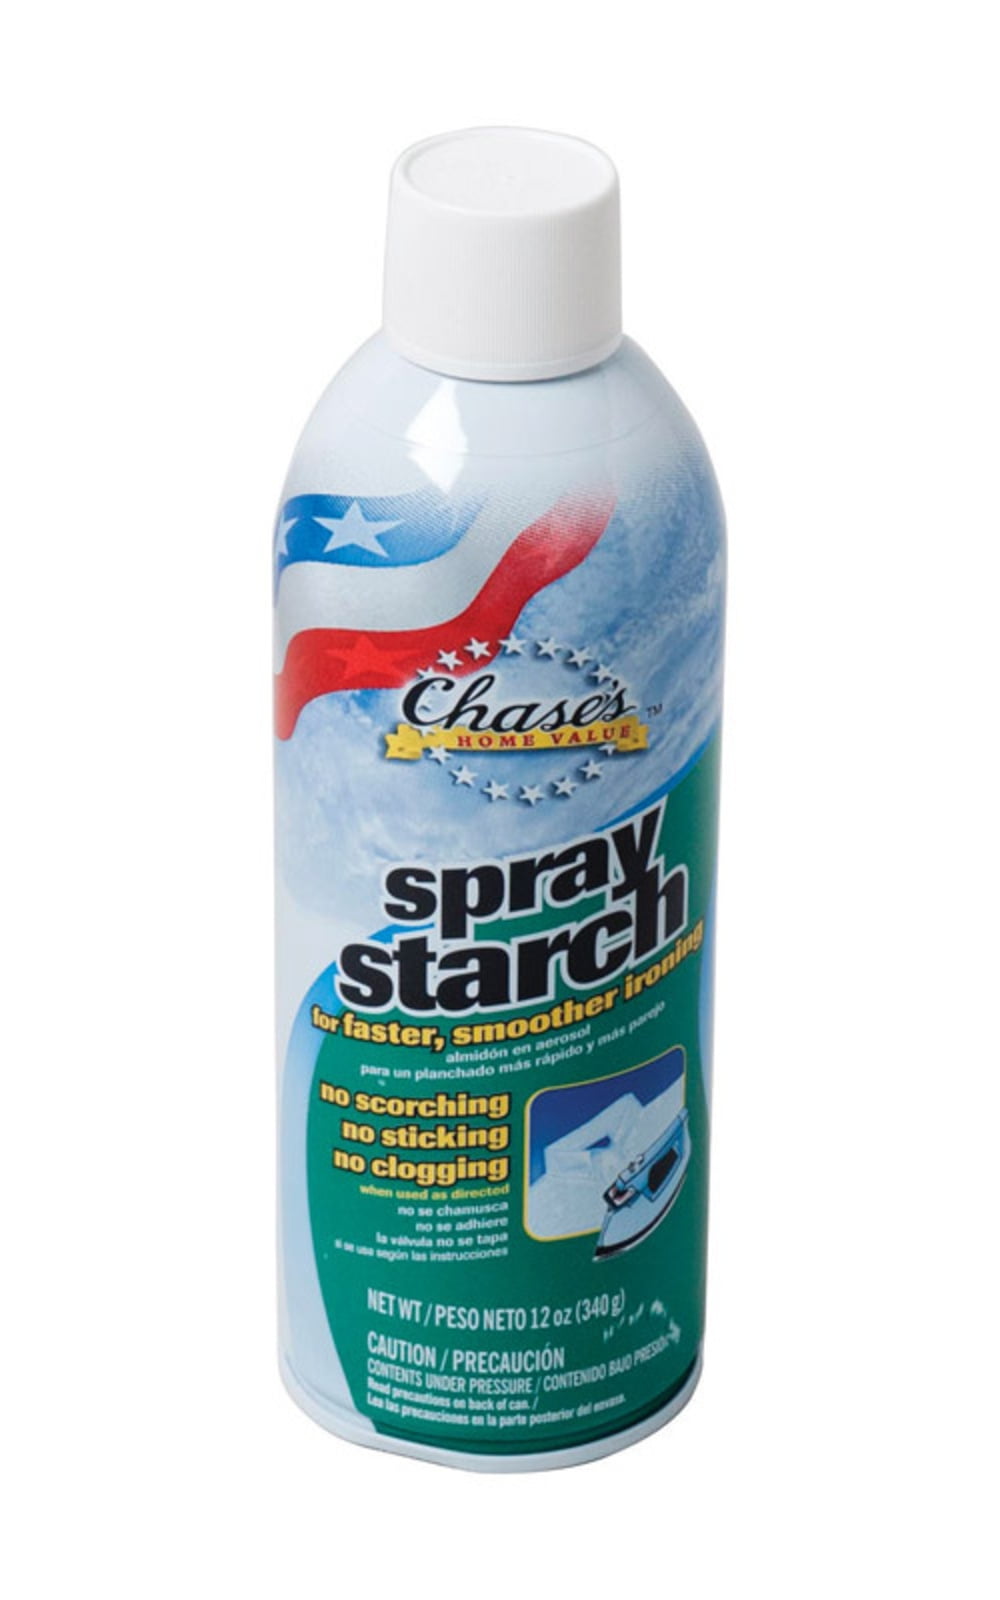 Spray Starch - household items - by owner - housewares sale - craigslist